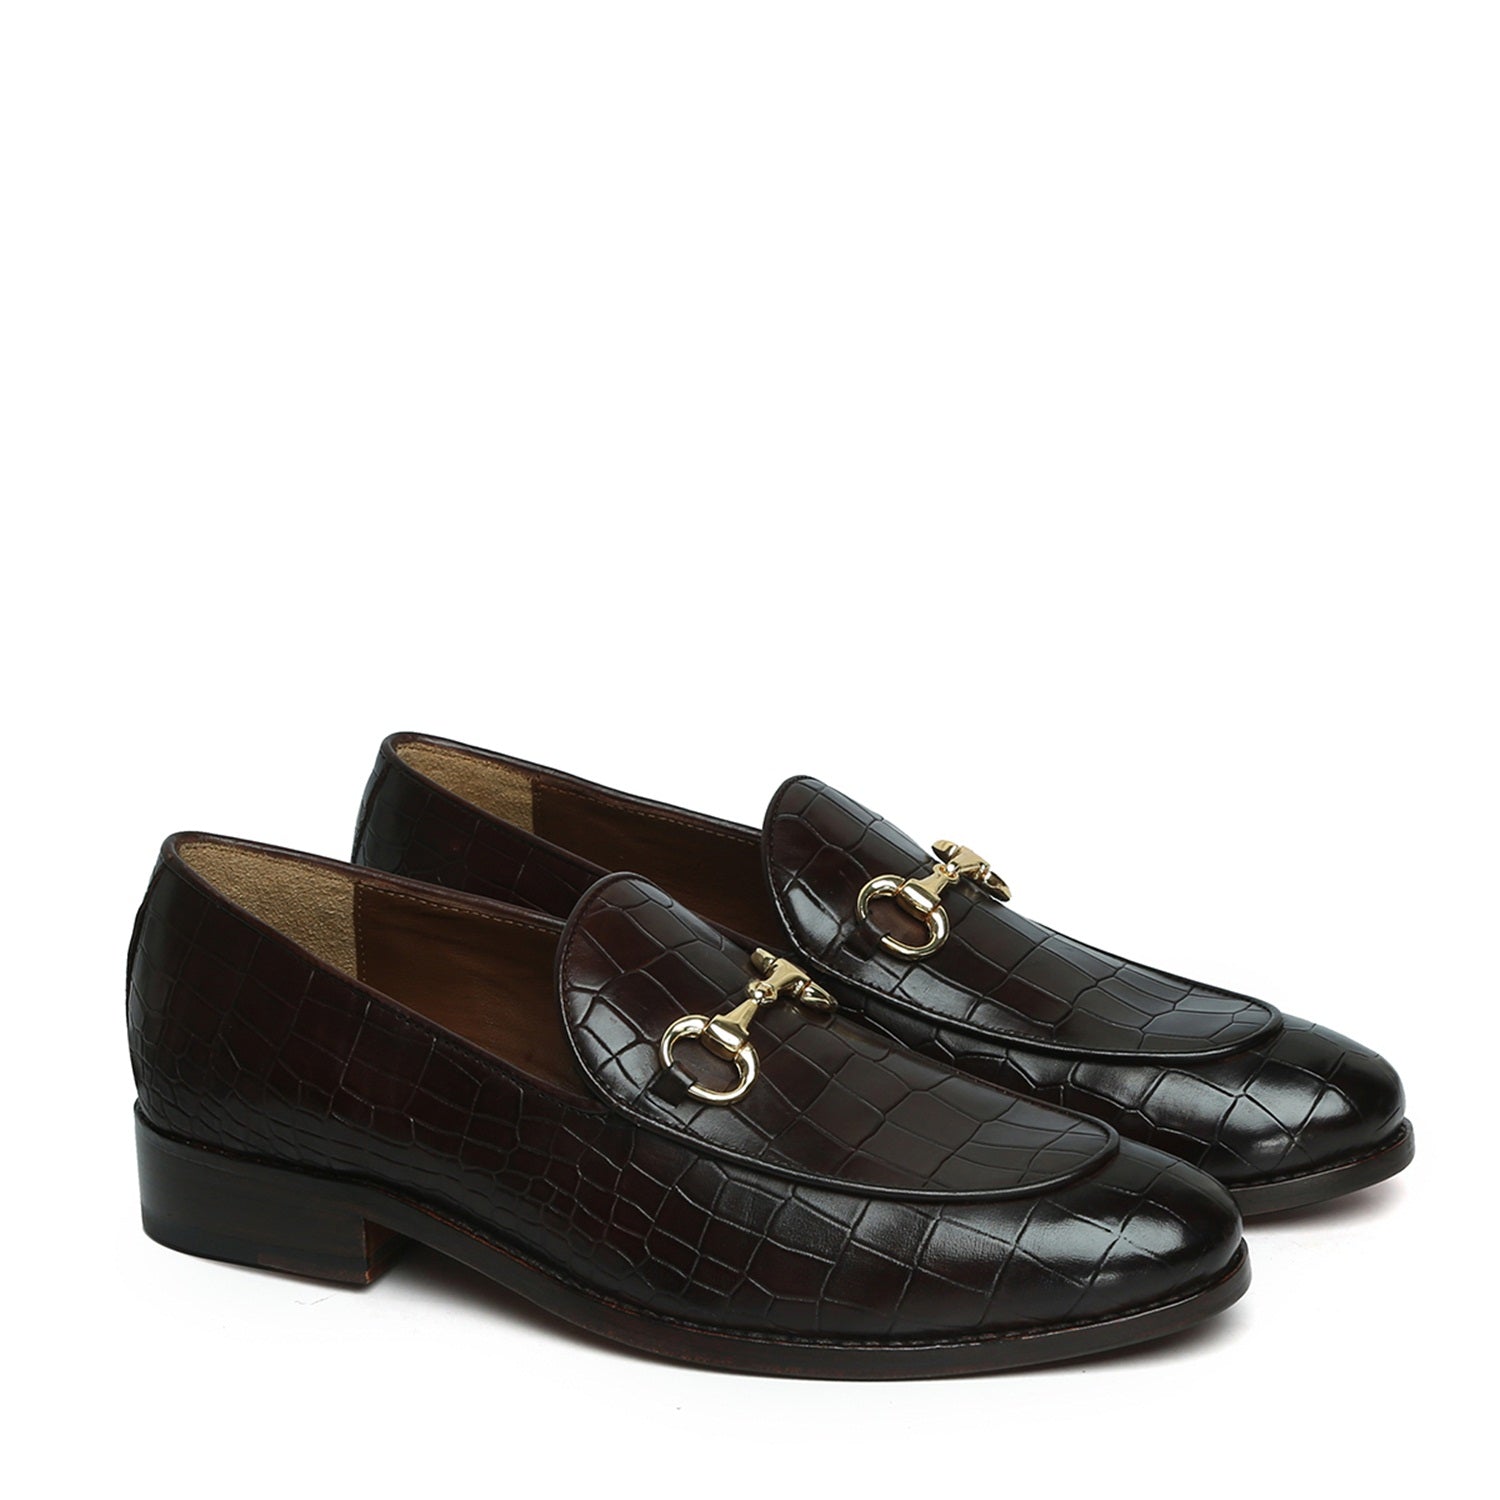 Horse-bit Buckled Loafers In Dark Brown Deep Cut Leather